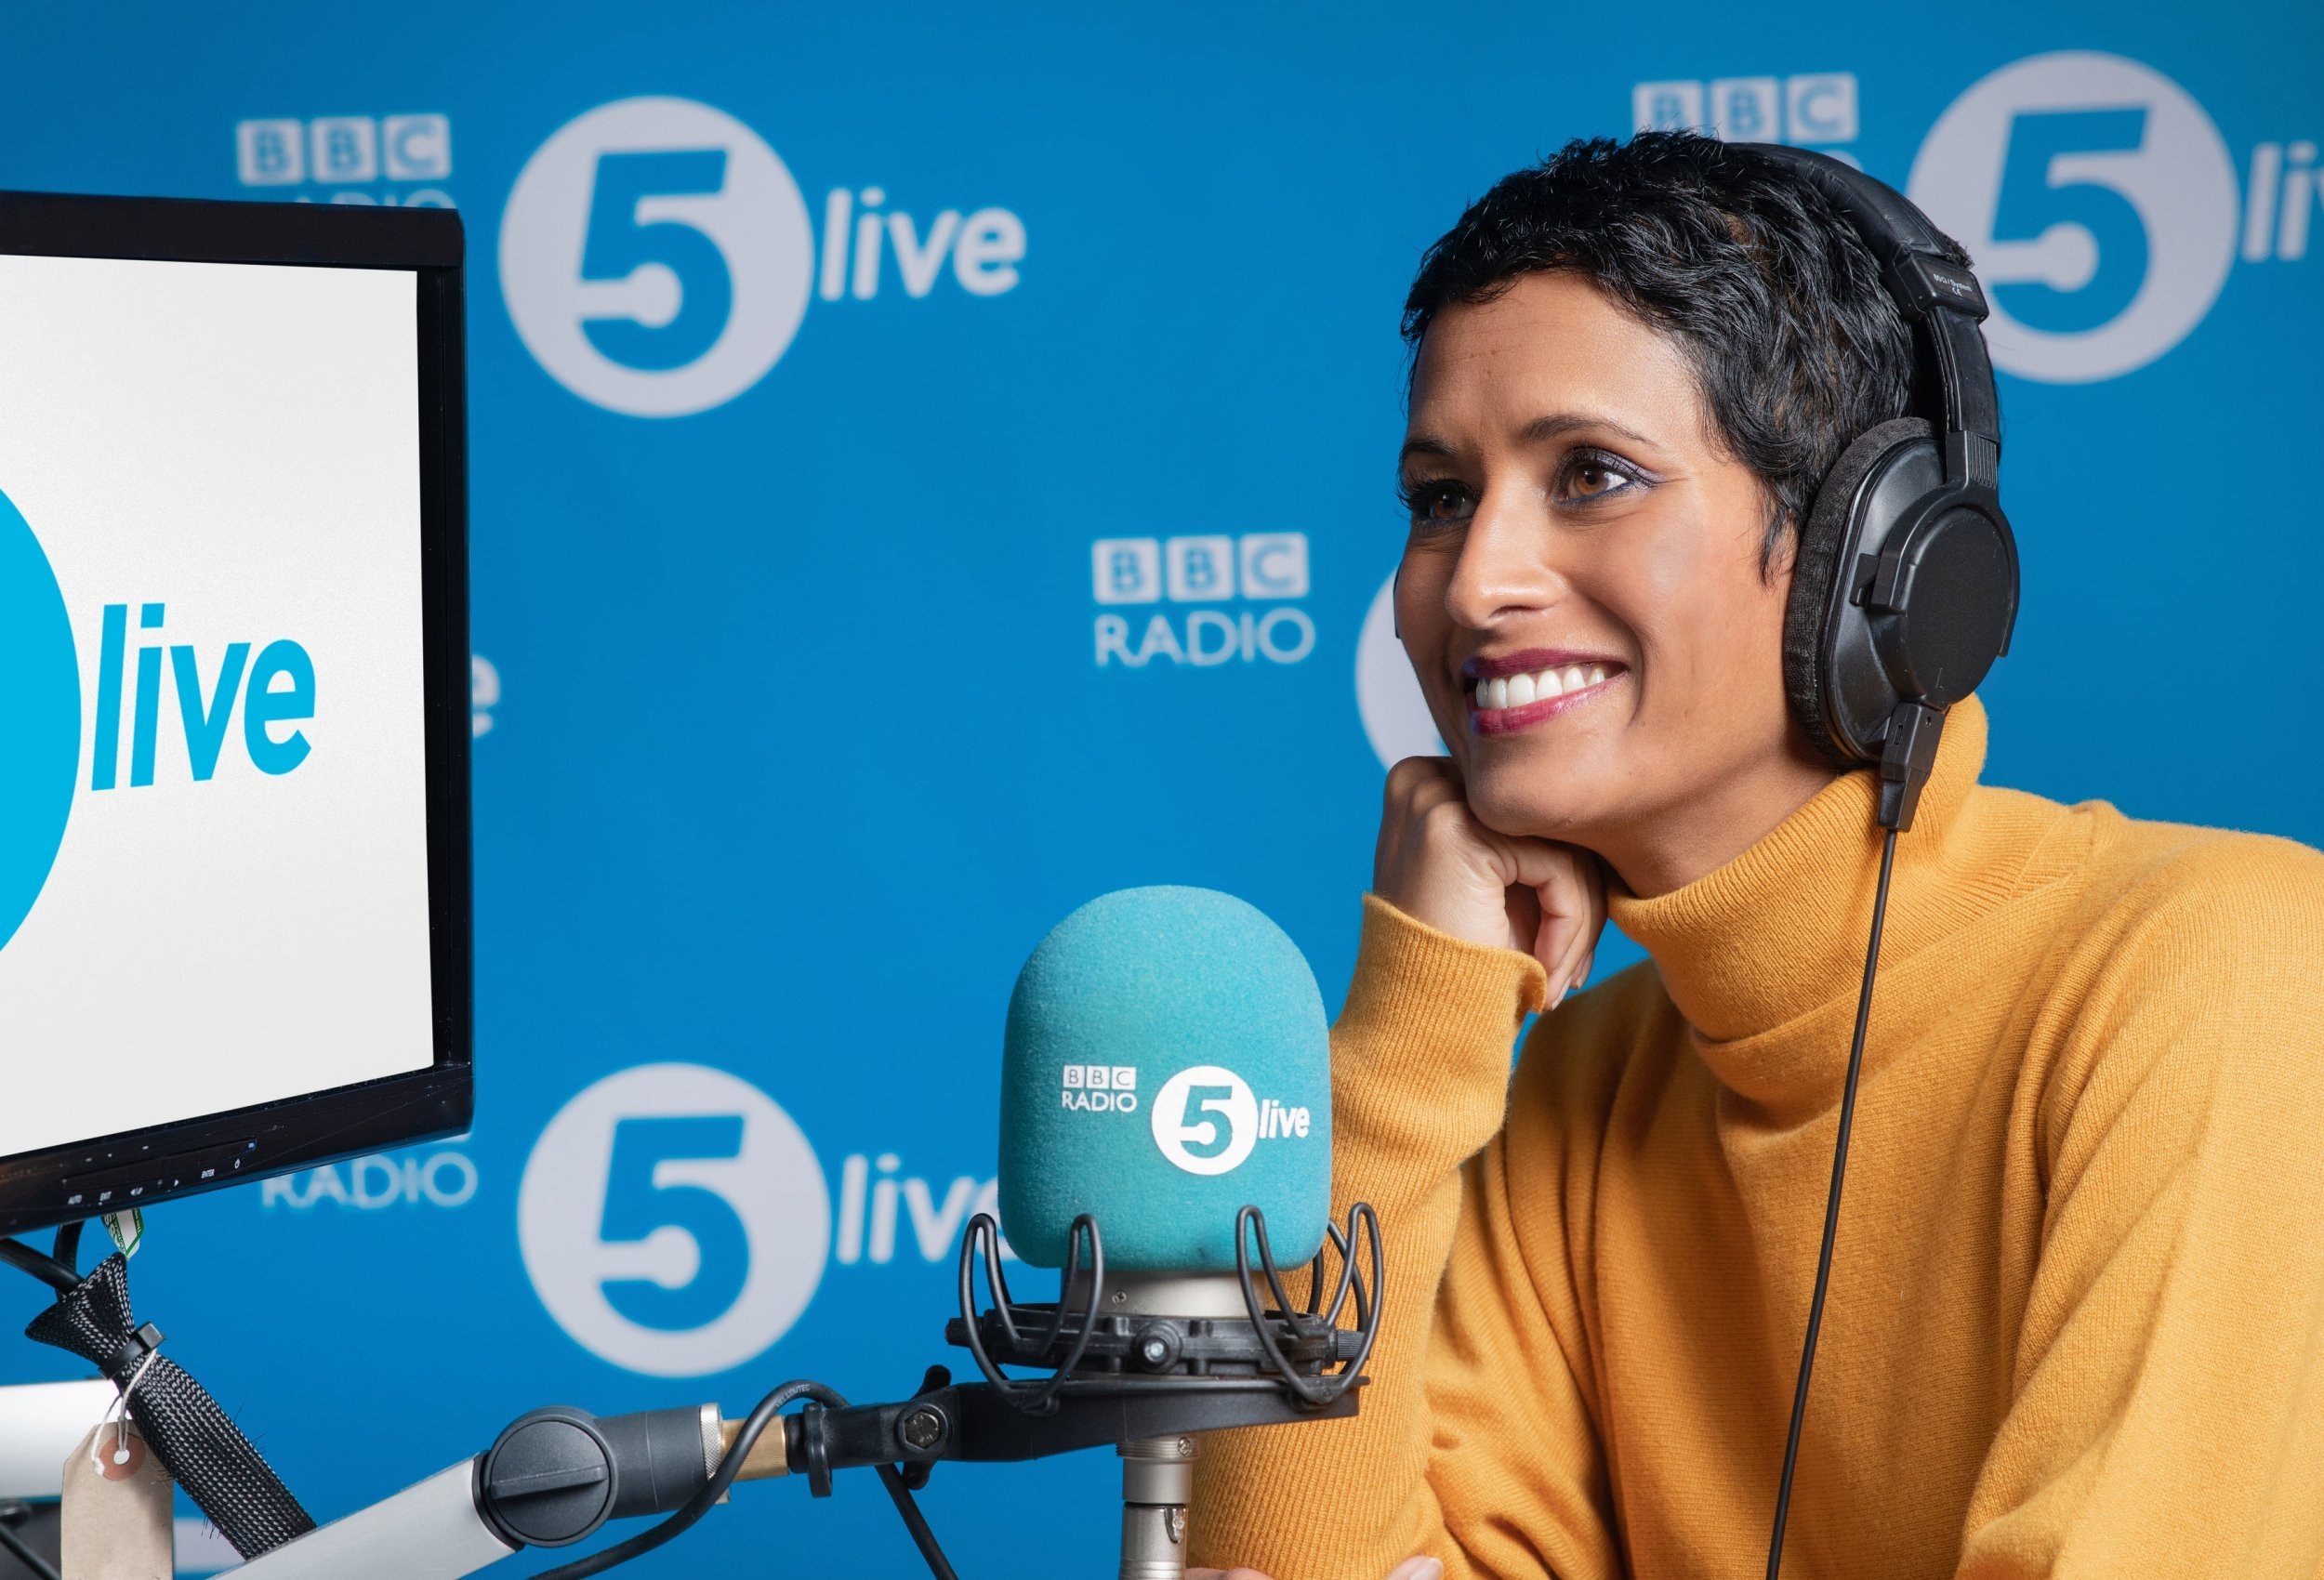 Naga Munchetty ‘absolutely delighted’ with Radio 5 Live hosting debut